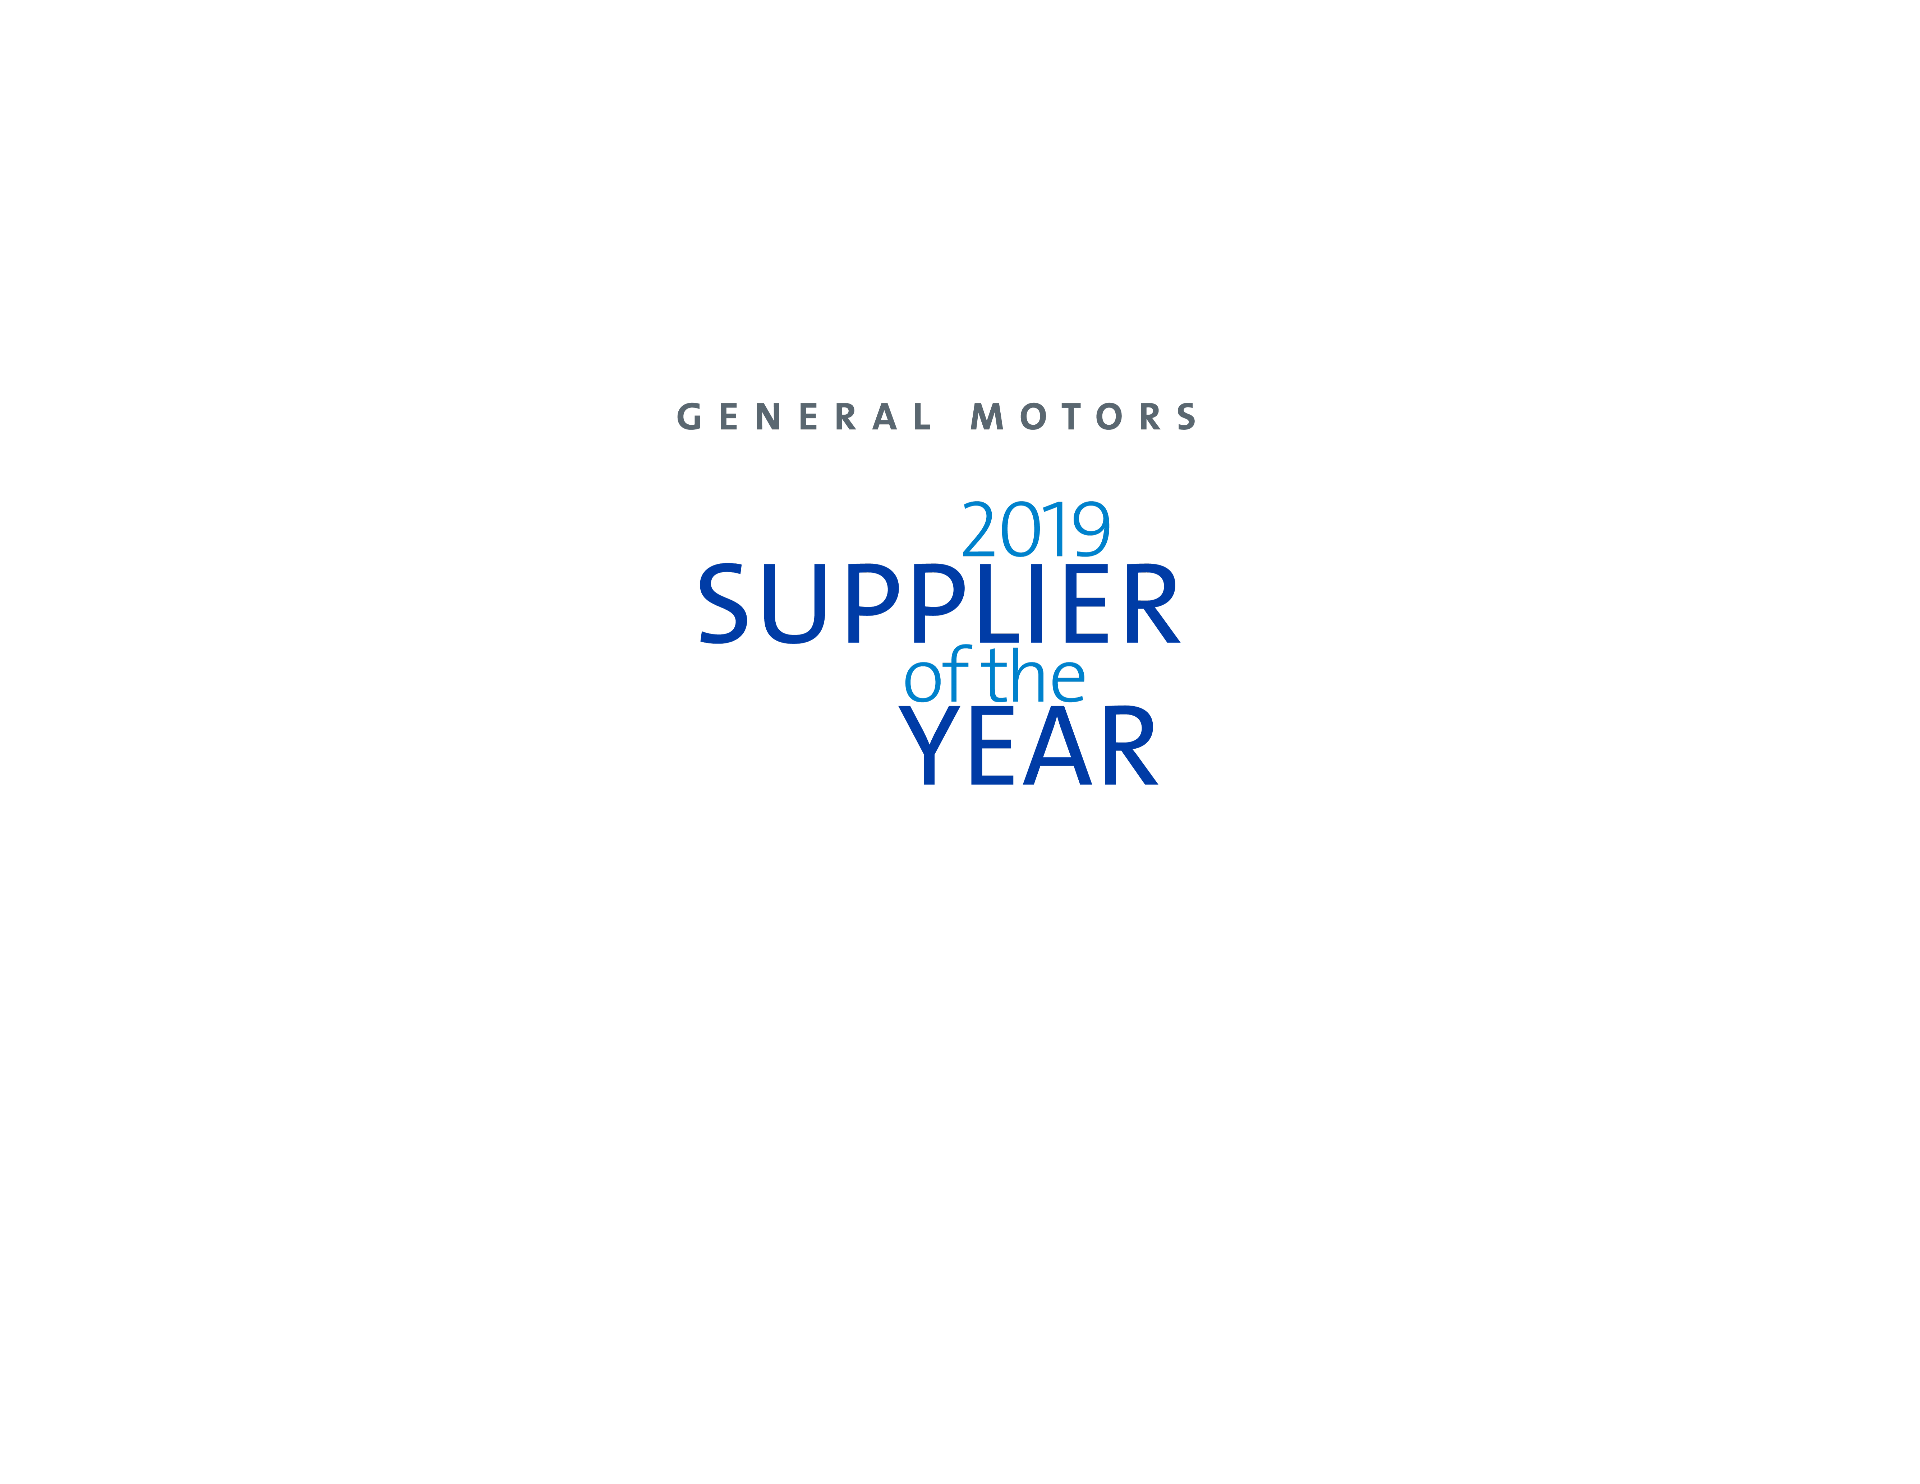 Innolux Corporation Recognized by General Motors as a 2019 Supplier of the Year Winner